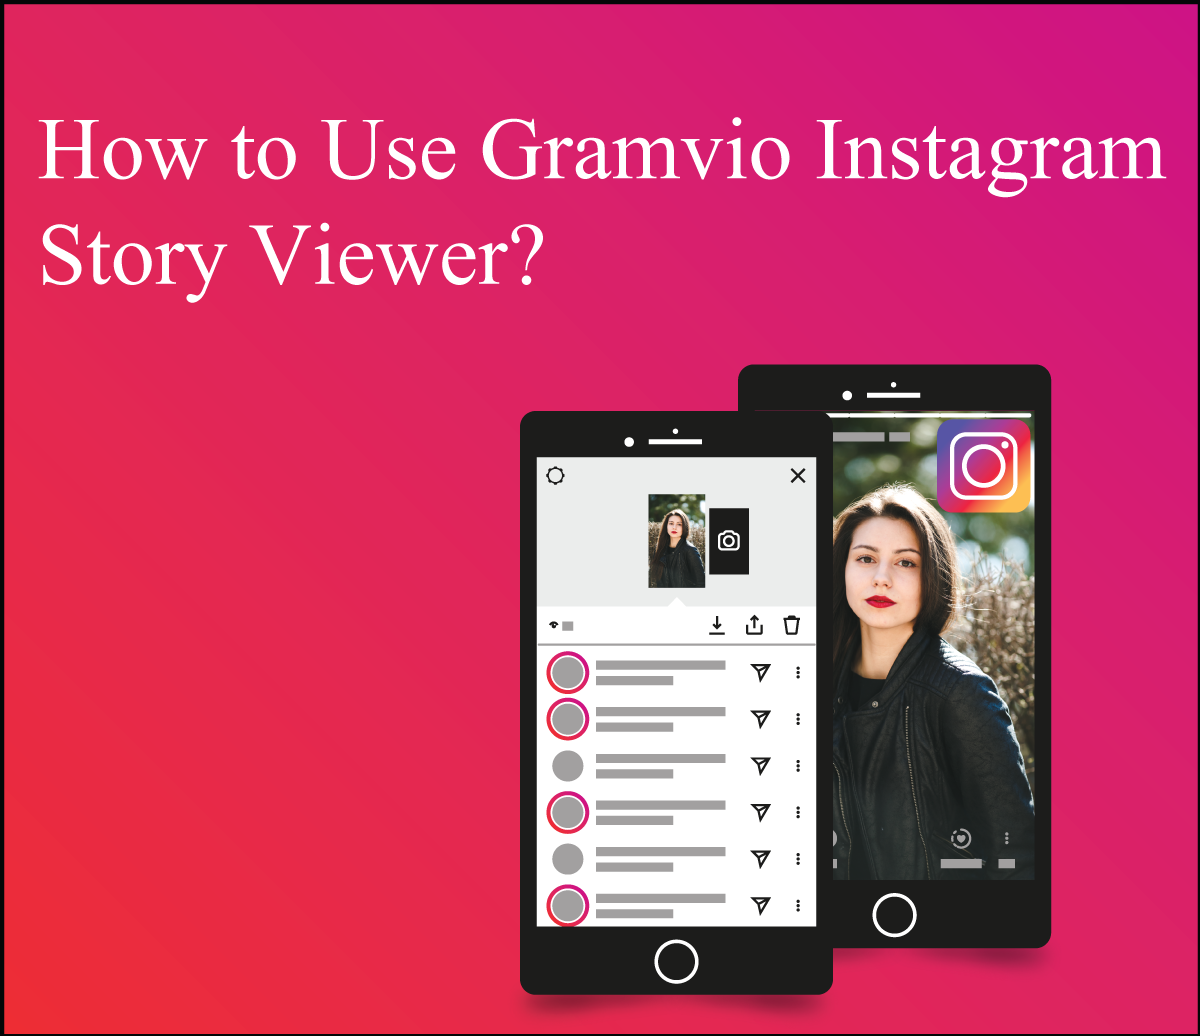 How to Use Gramvio Instagram Story Viewer?